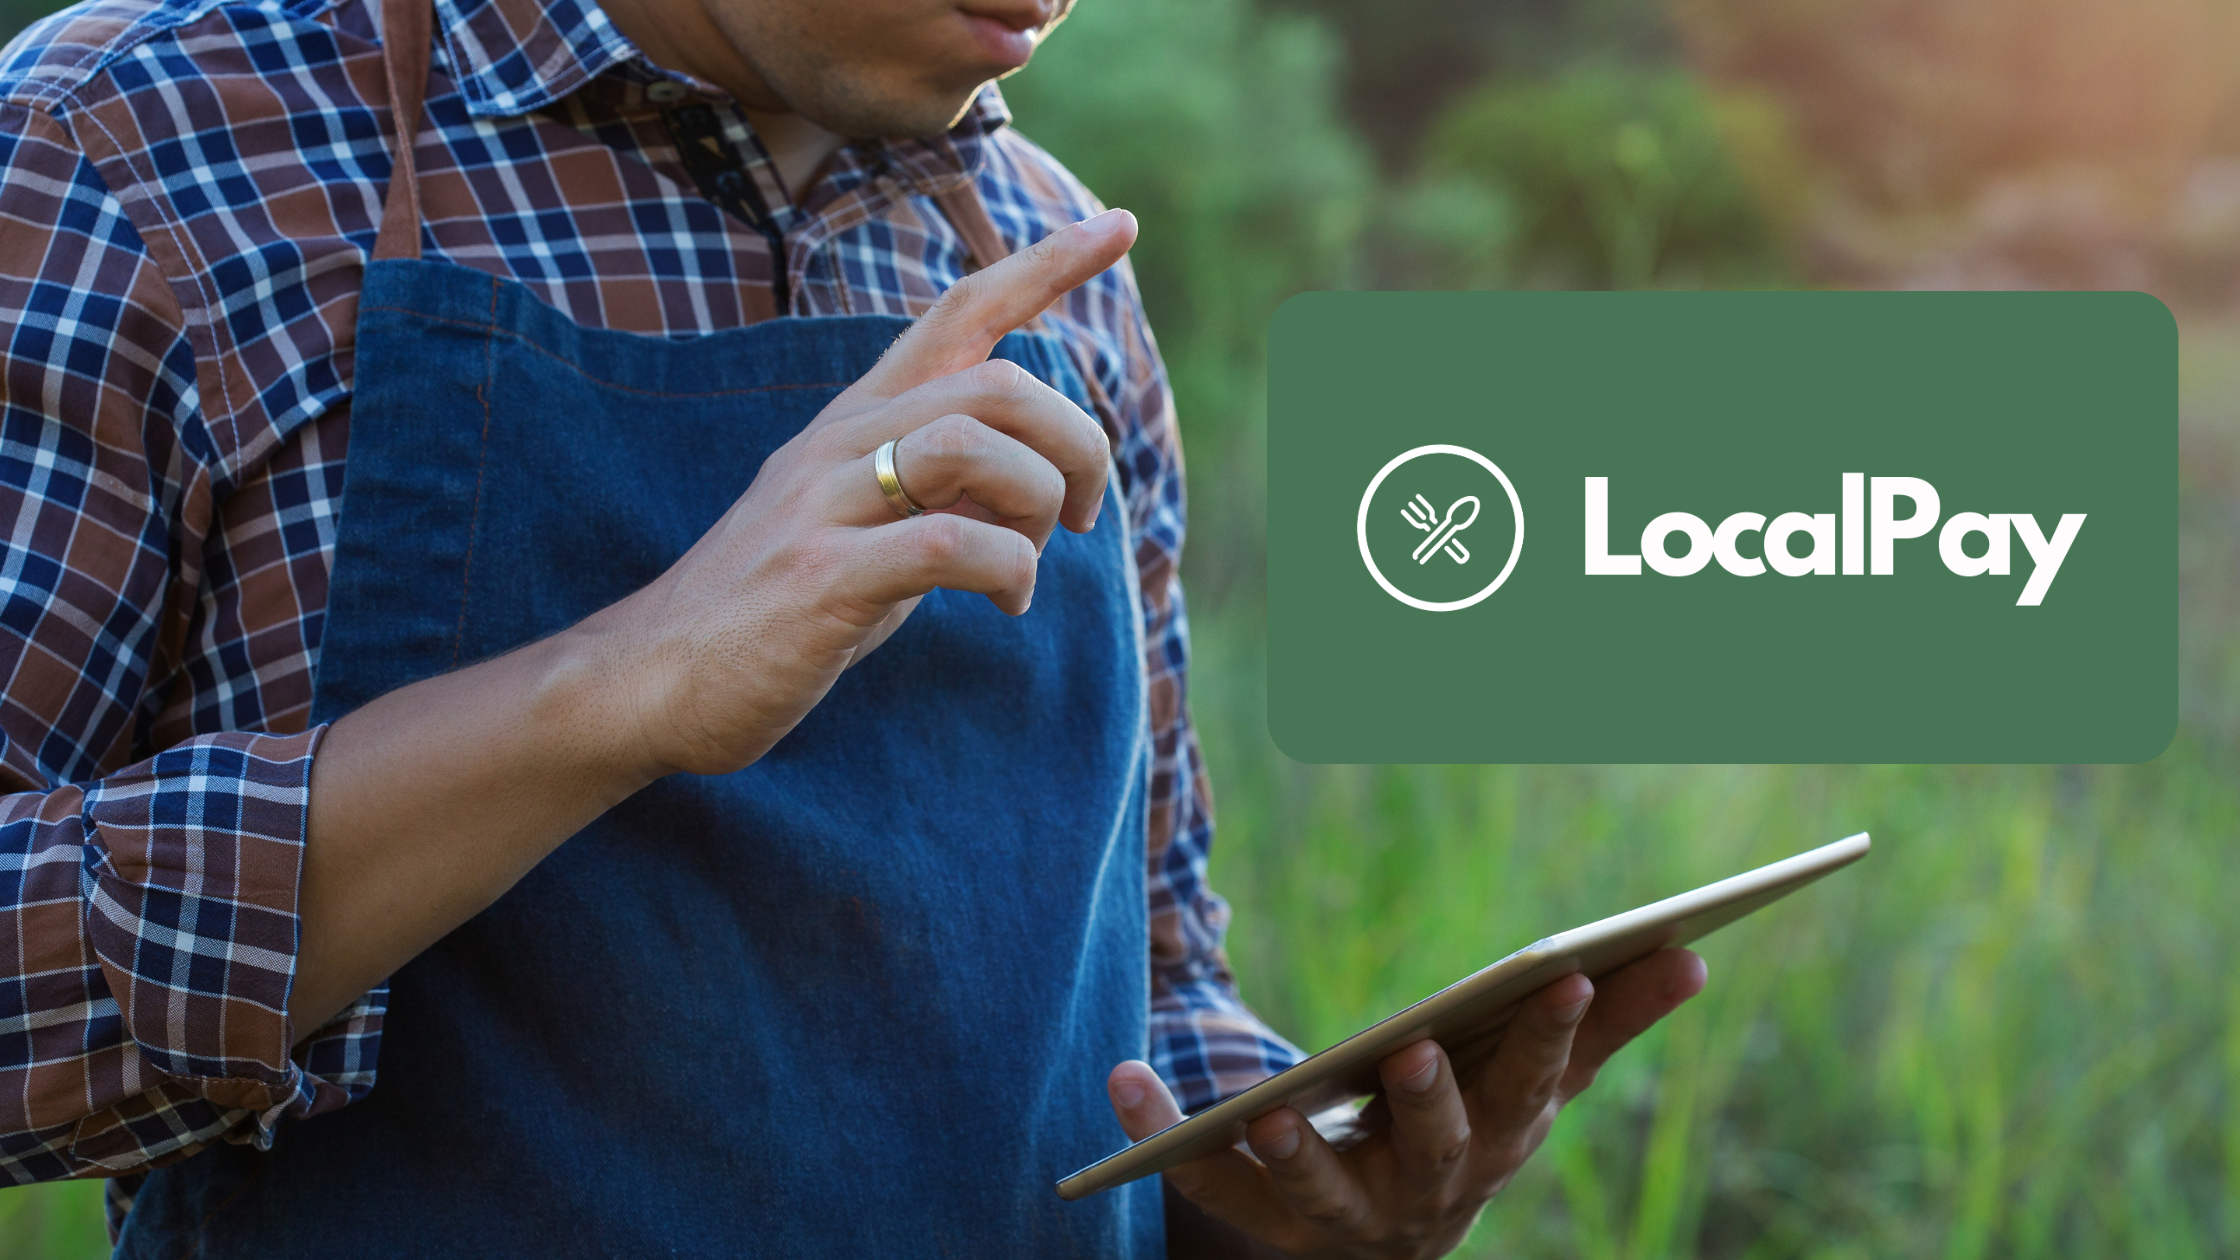 Man with ipad in field with LocalPay logo on top.